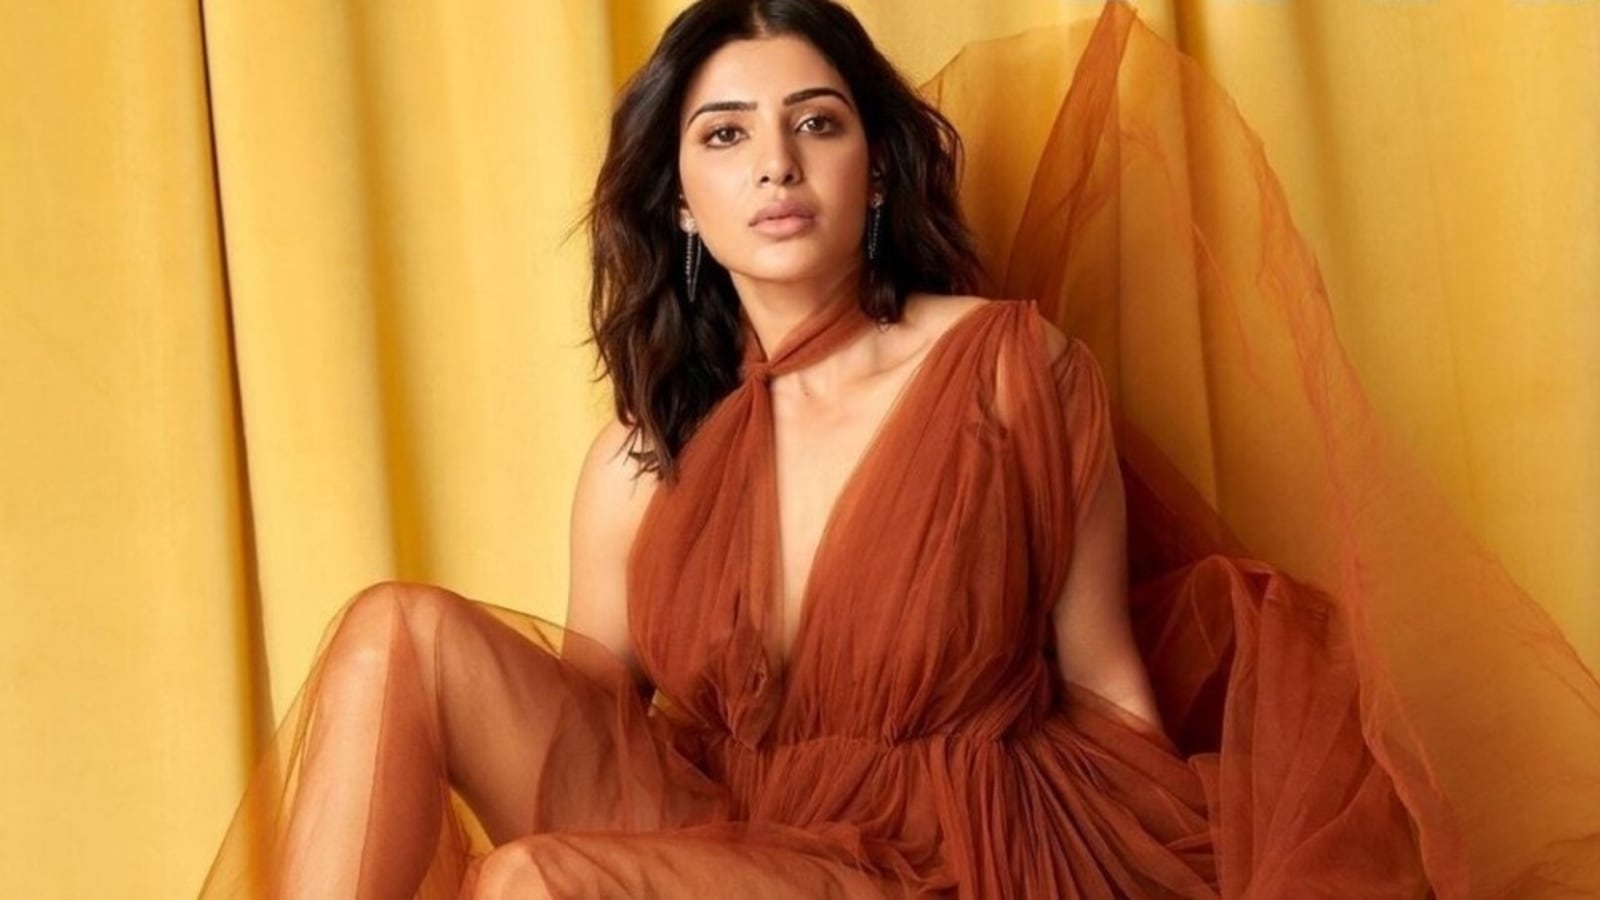 Samantha Www Xxx Video - Samantha Ruth Prabhu aces Jump Squat in video feat special appearance of  her dog | Health - Hindustan Times